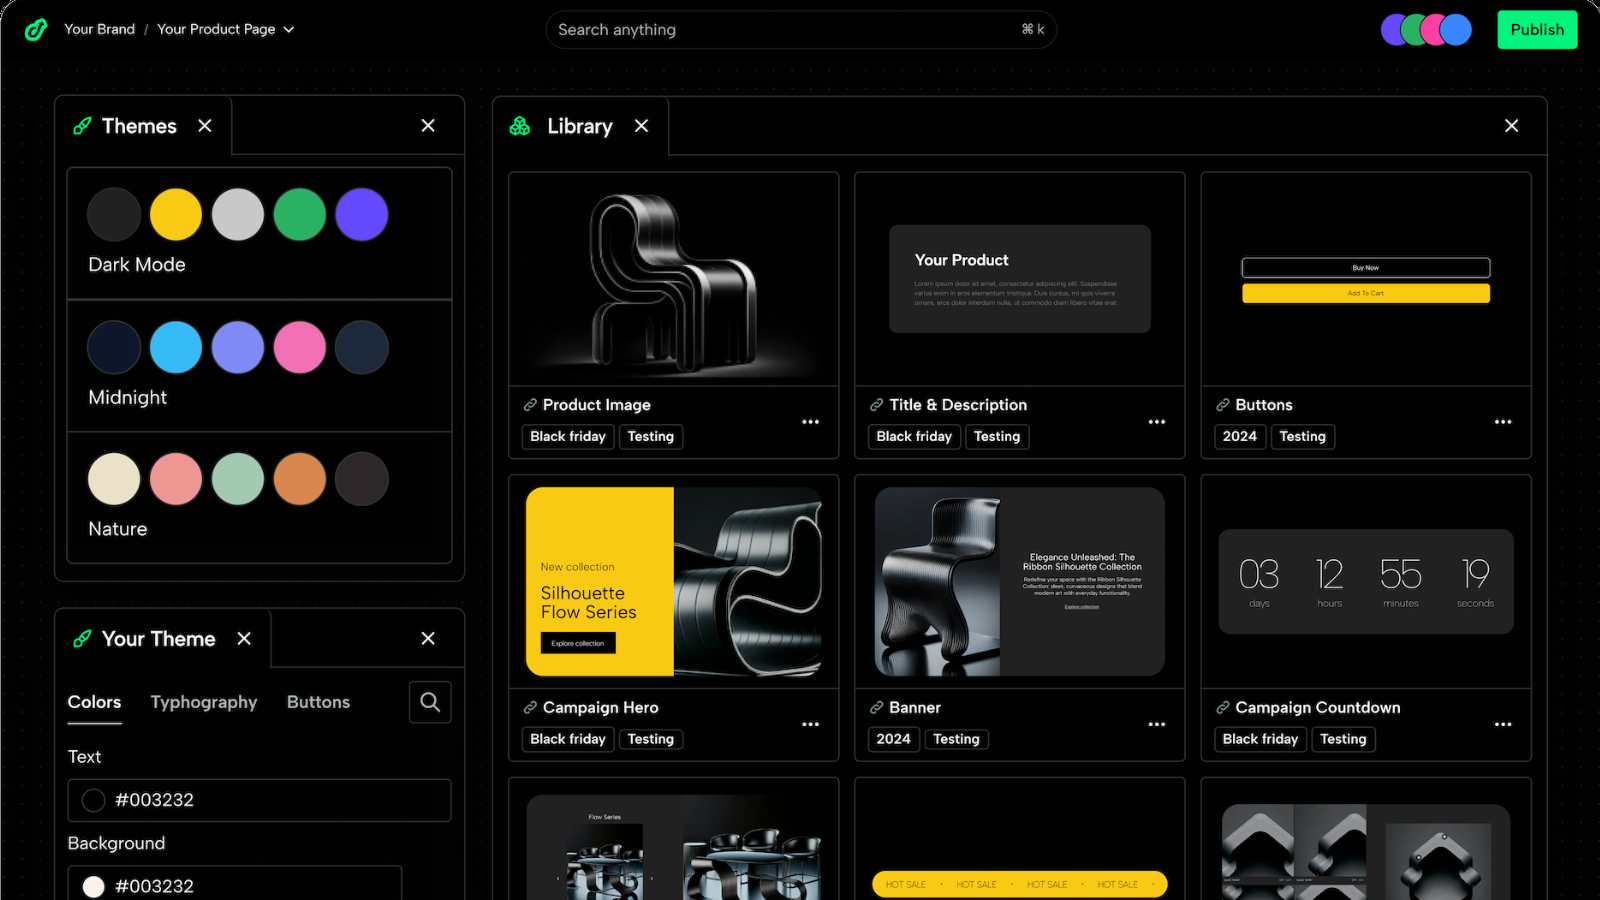 Deco.cx grabs $2.2M to bring simplicity back to brand website creation